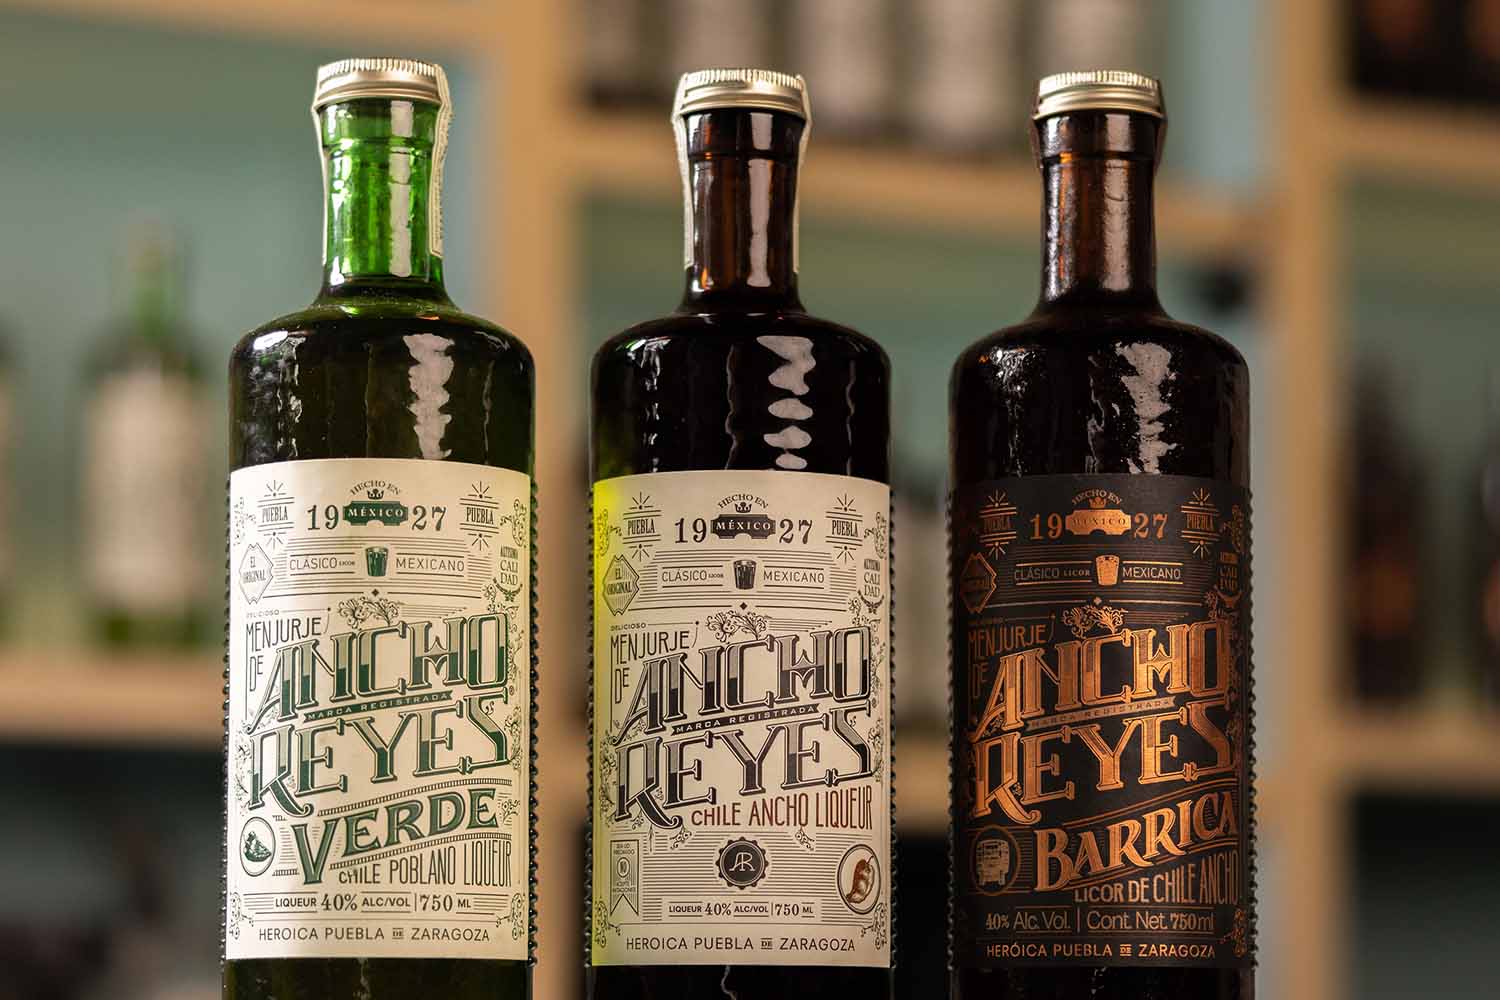 The three bottles produced by Ancho Reyes